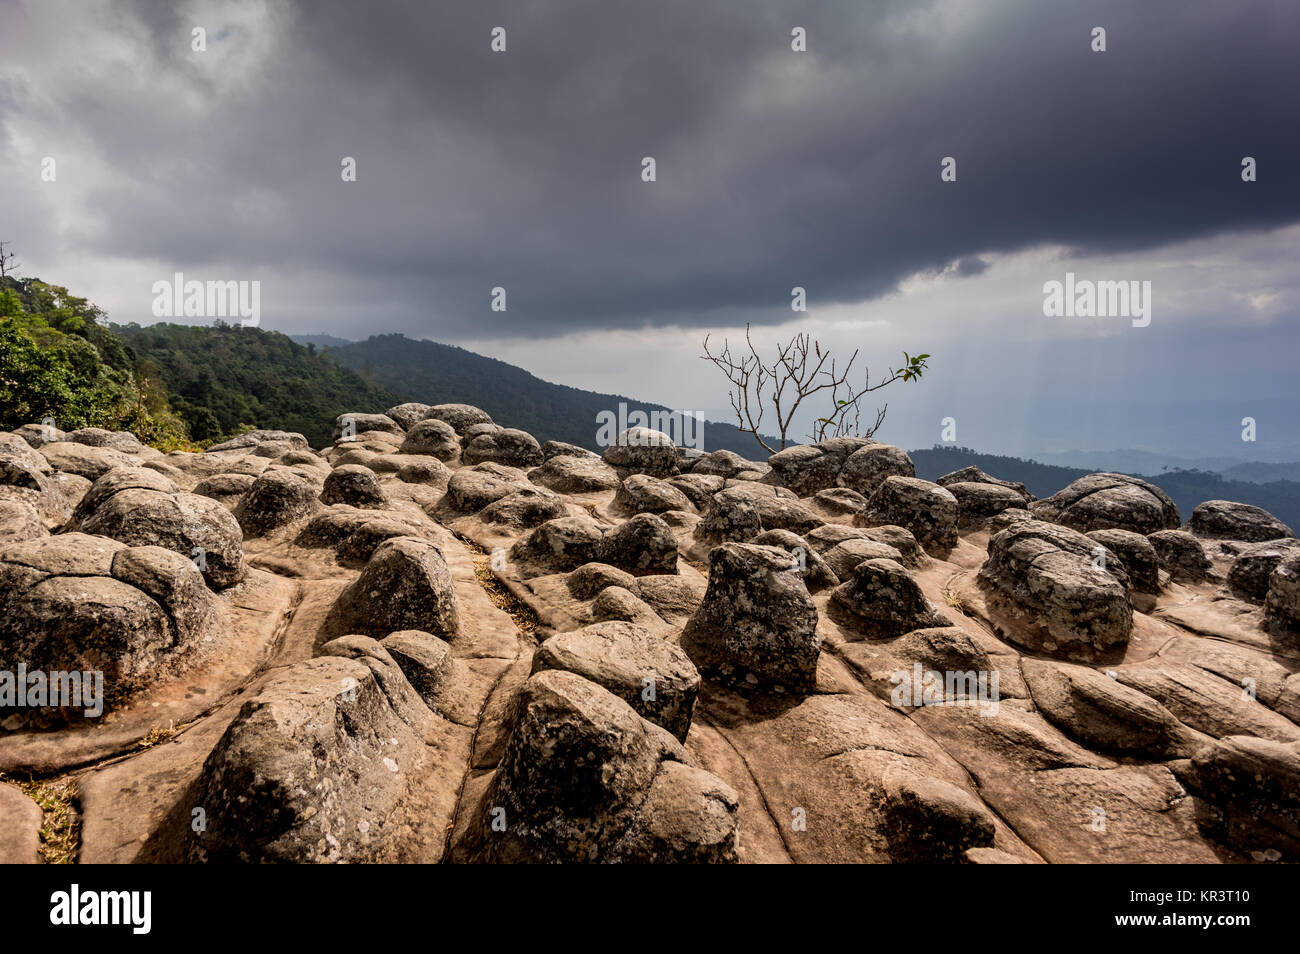 dark and ominous clouds sweeping across the plains seen from the top of a mountain in Phu Ruea national park, Thailand Stock Photo